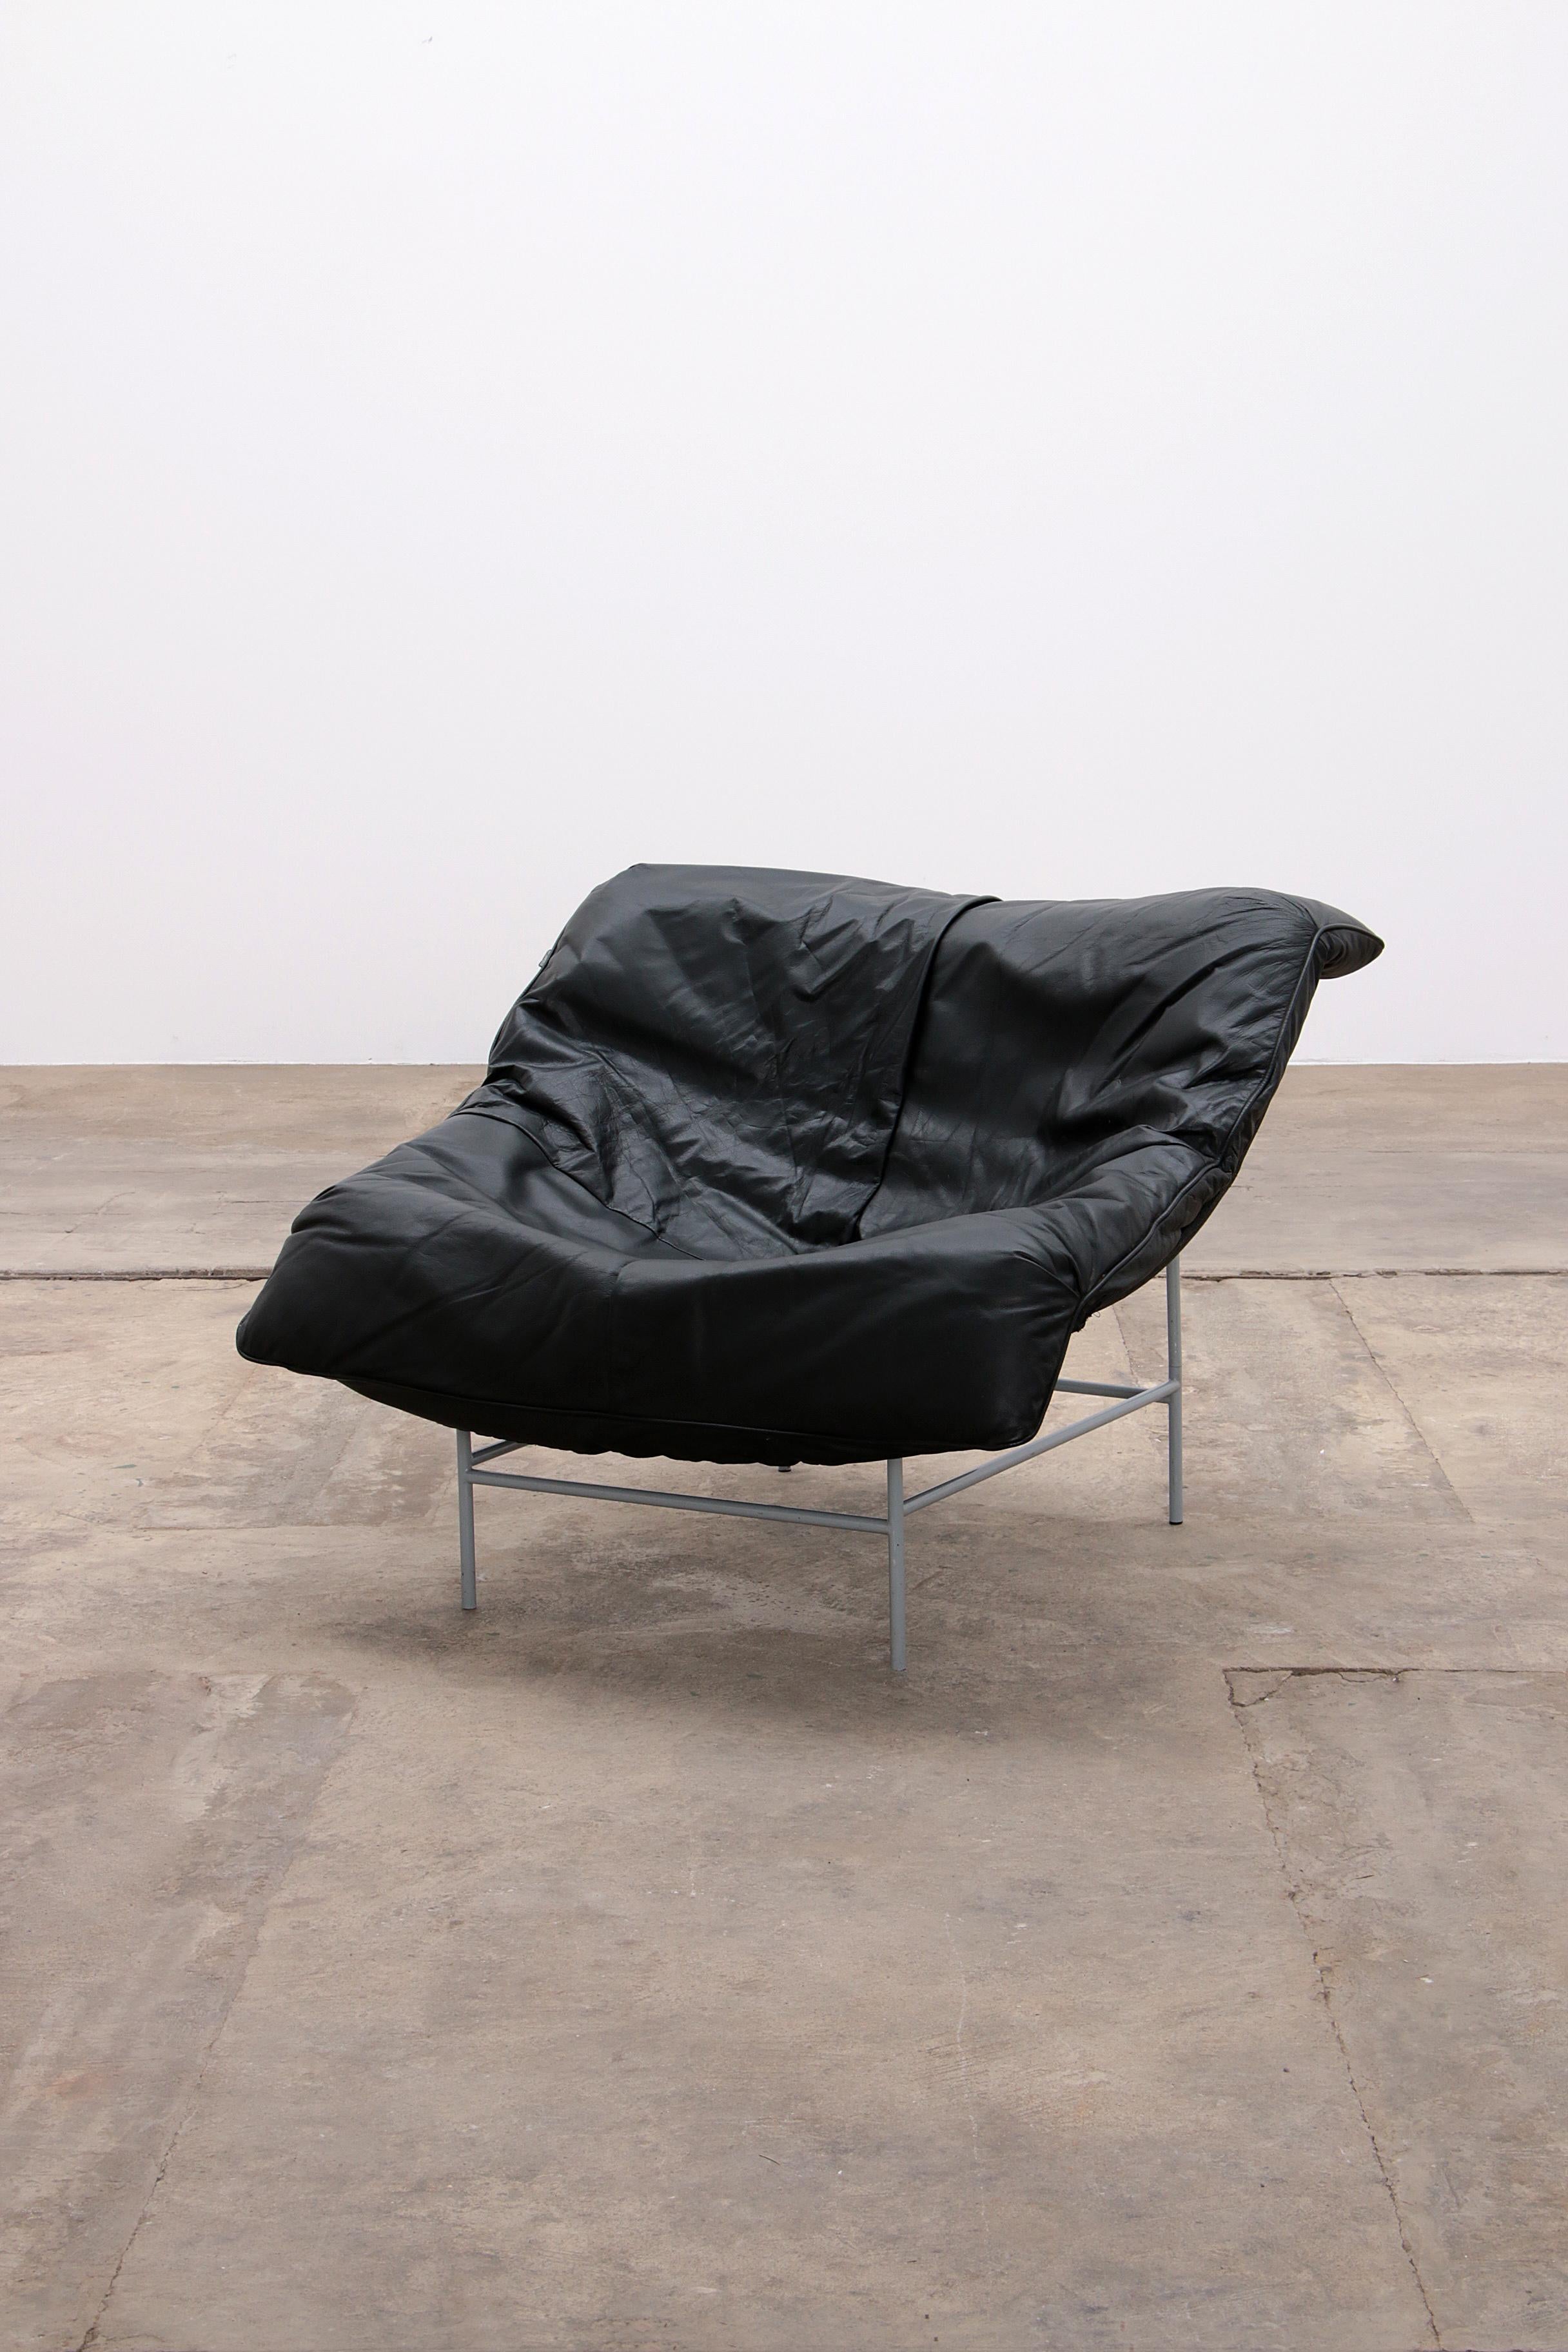 Gerard van den Berg butterfly chair for Montis, 1980 black


Butterfly armchair was designed in the 1980s by Gerard van den Berg and produced by furniture manufacturer Montis. The minimalistic metal frame seems fragile, but is very sturdy. The black